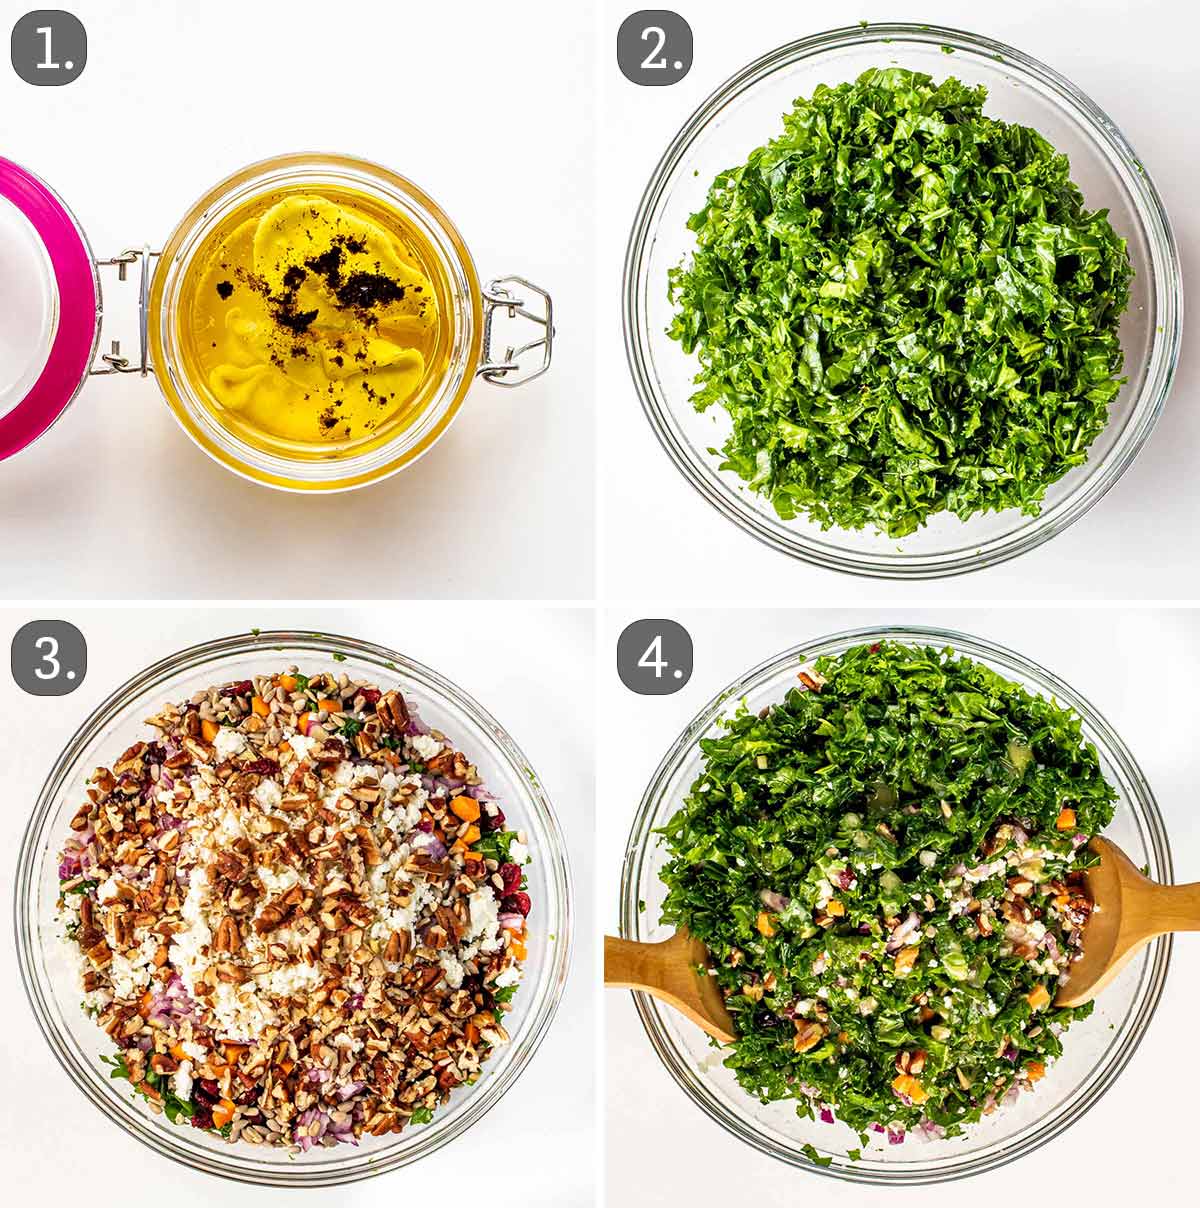 detailed process shots showing how to make kale salad.